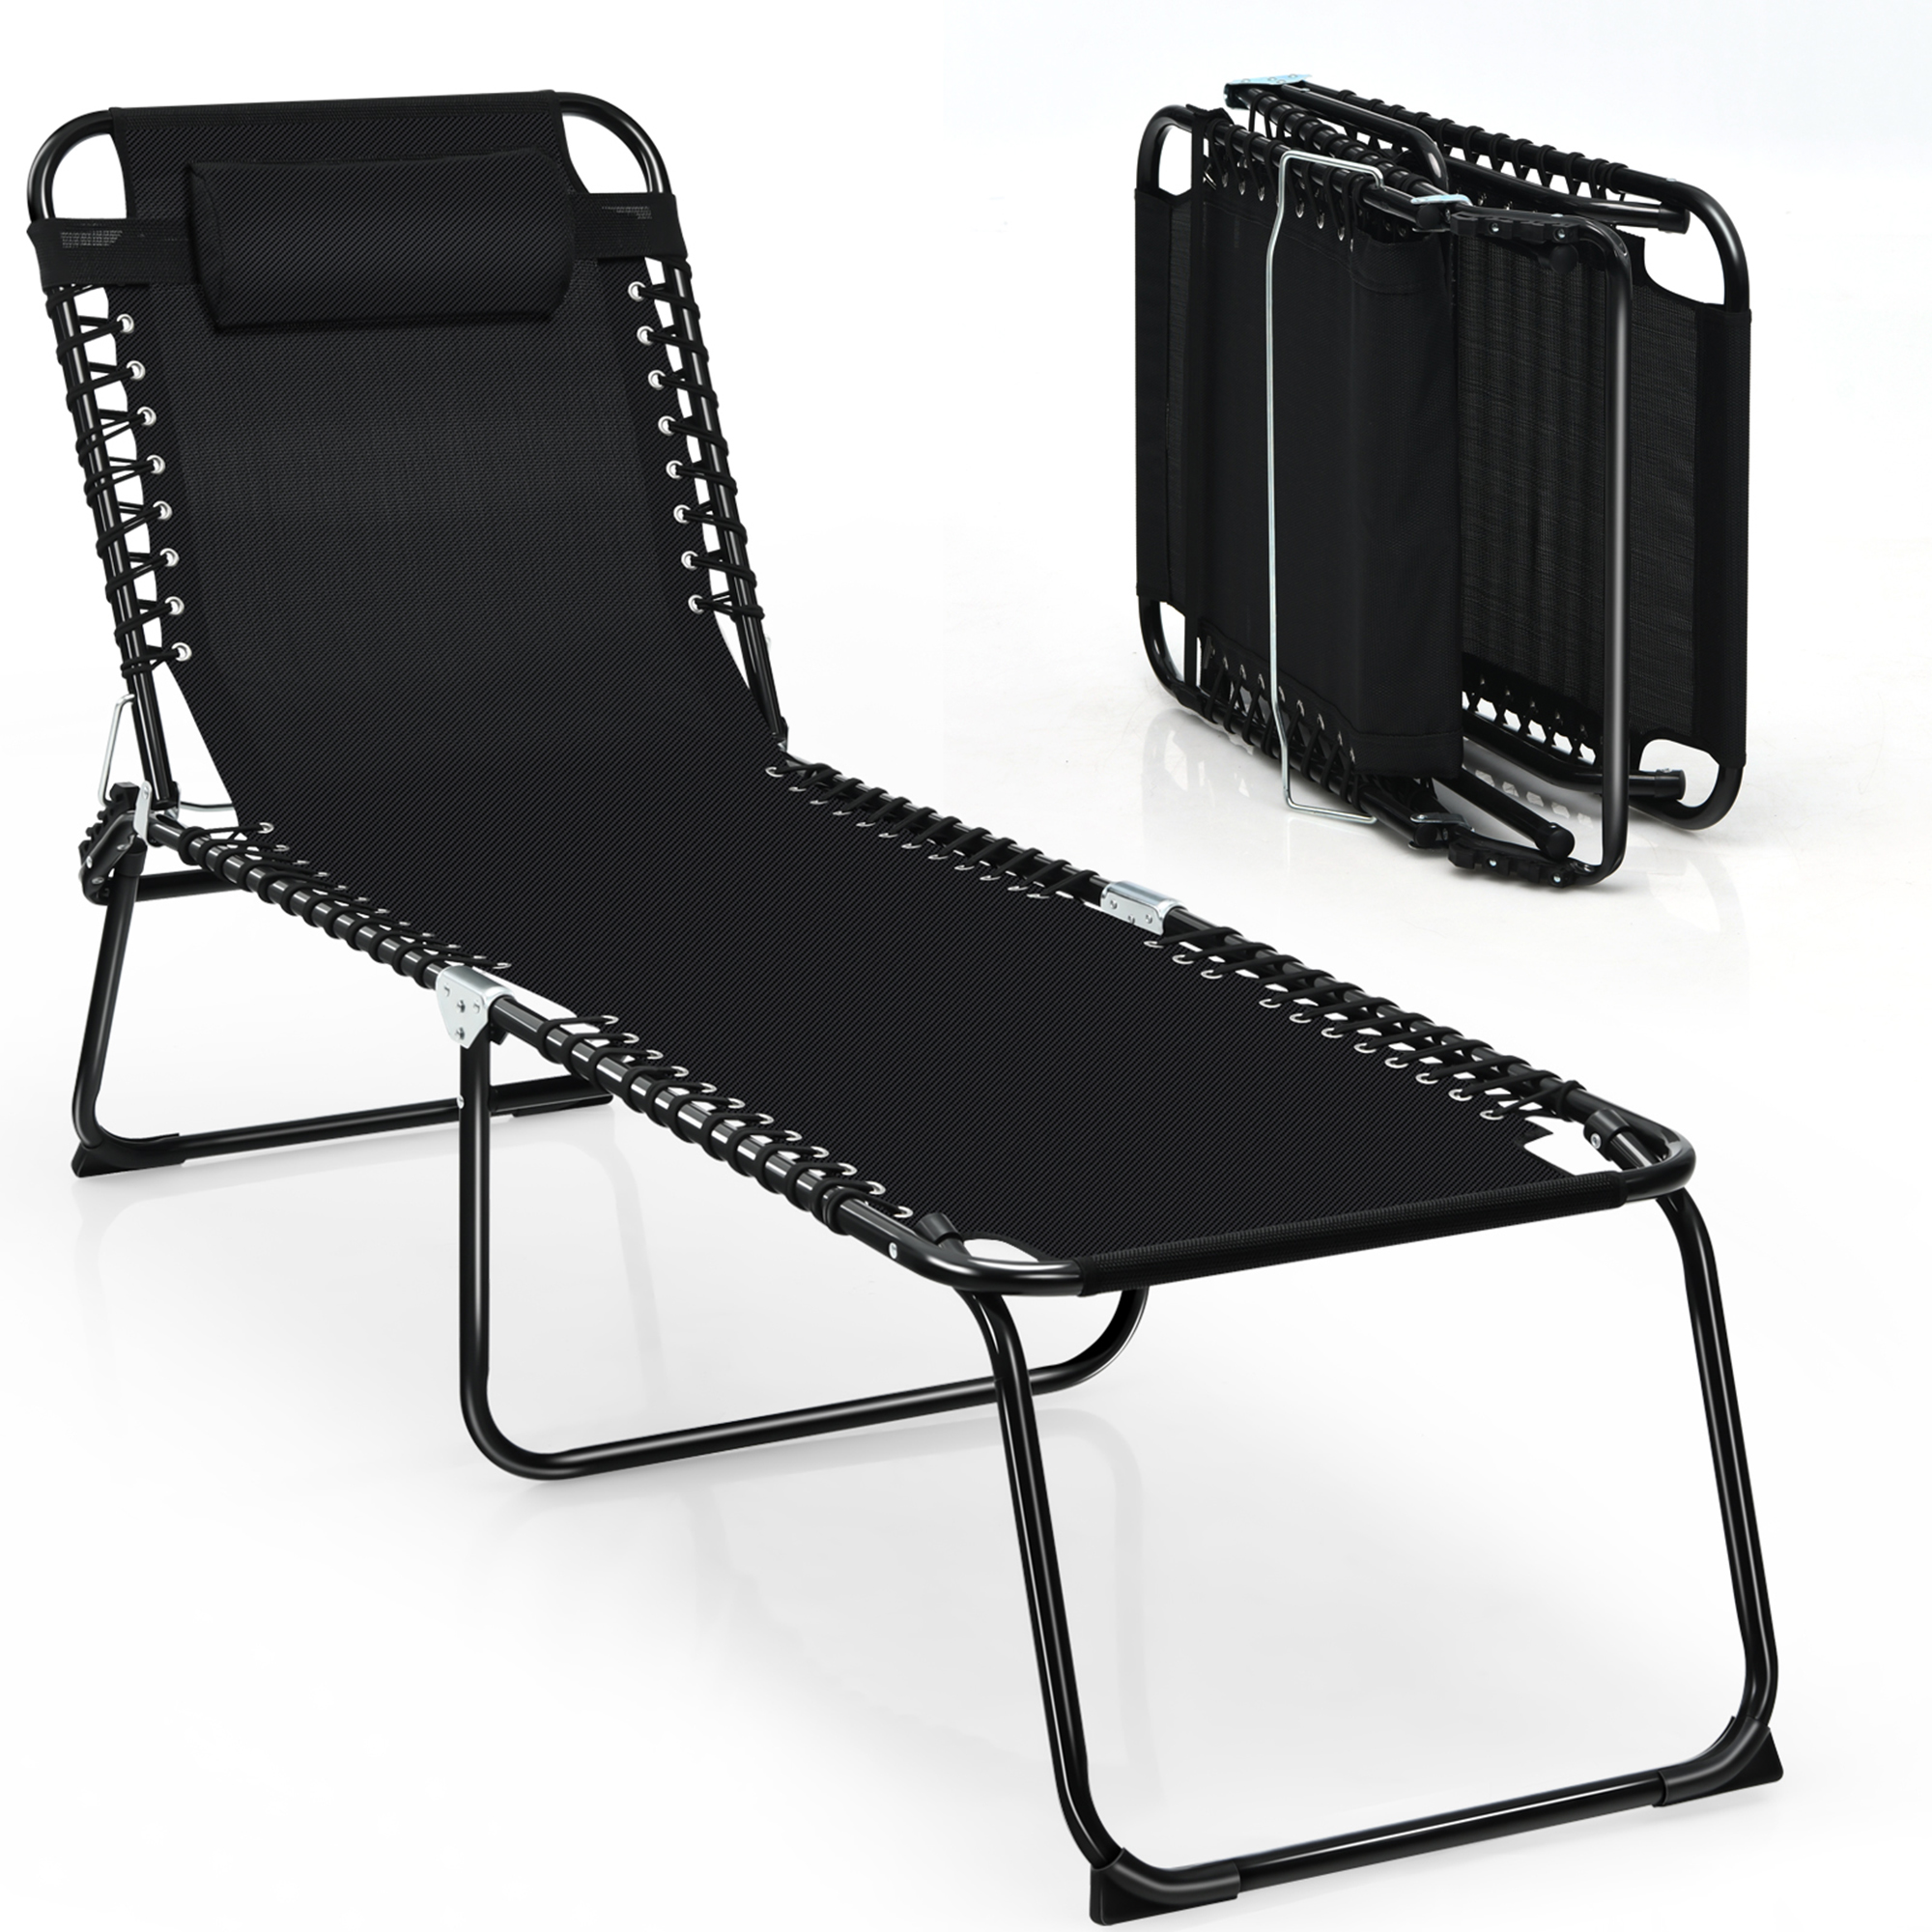 Gymax Folding Beach Lounger Chaise Lounge Chair w/ Pillow 4-Level Backrest Black - image 1 of 10